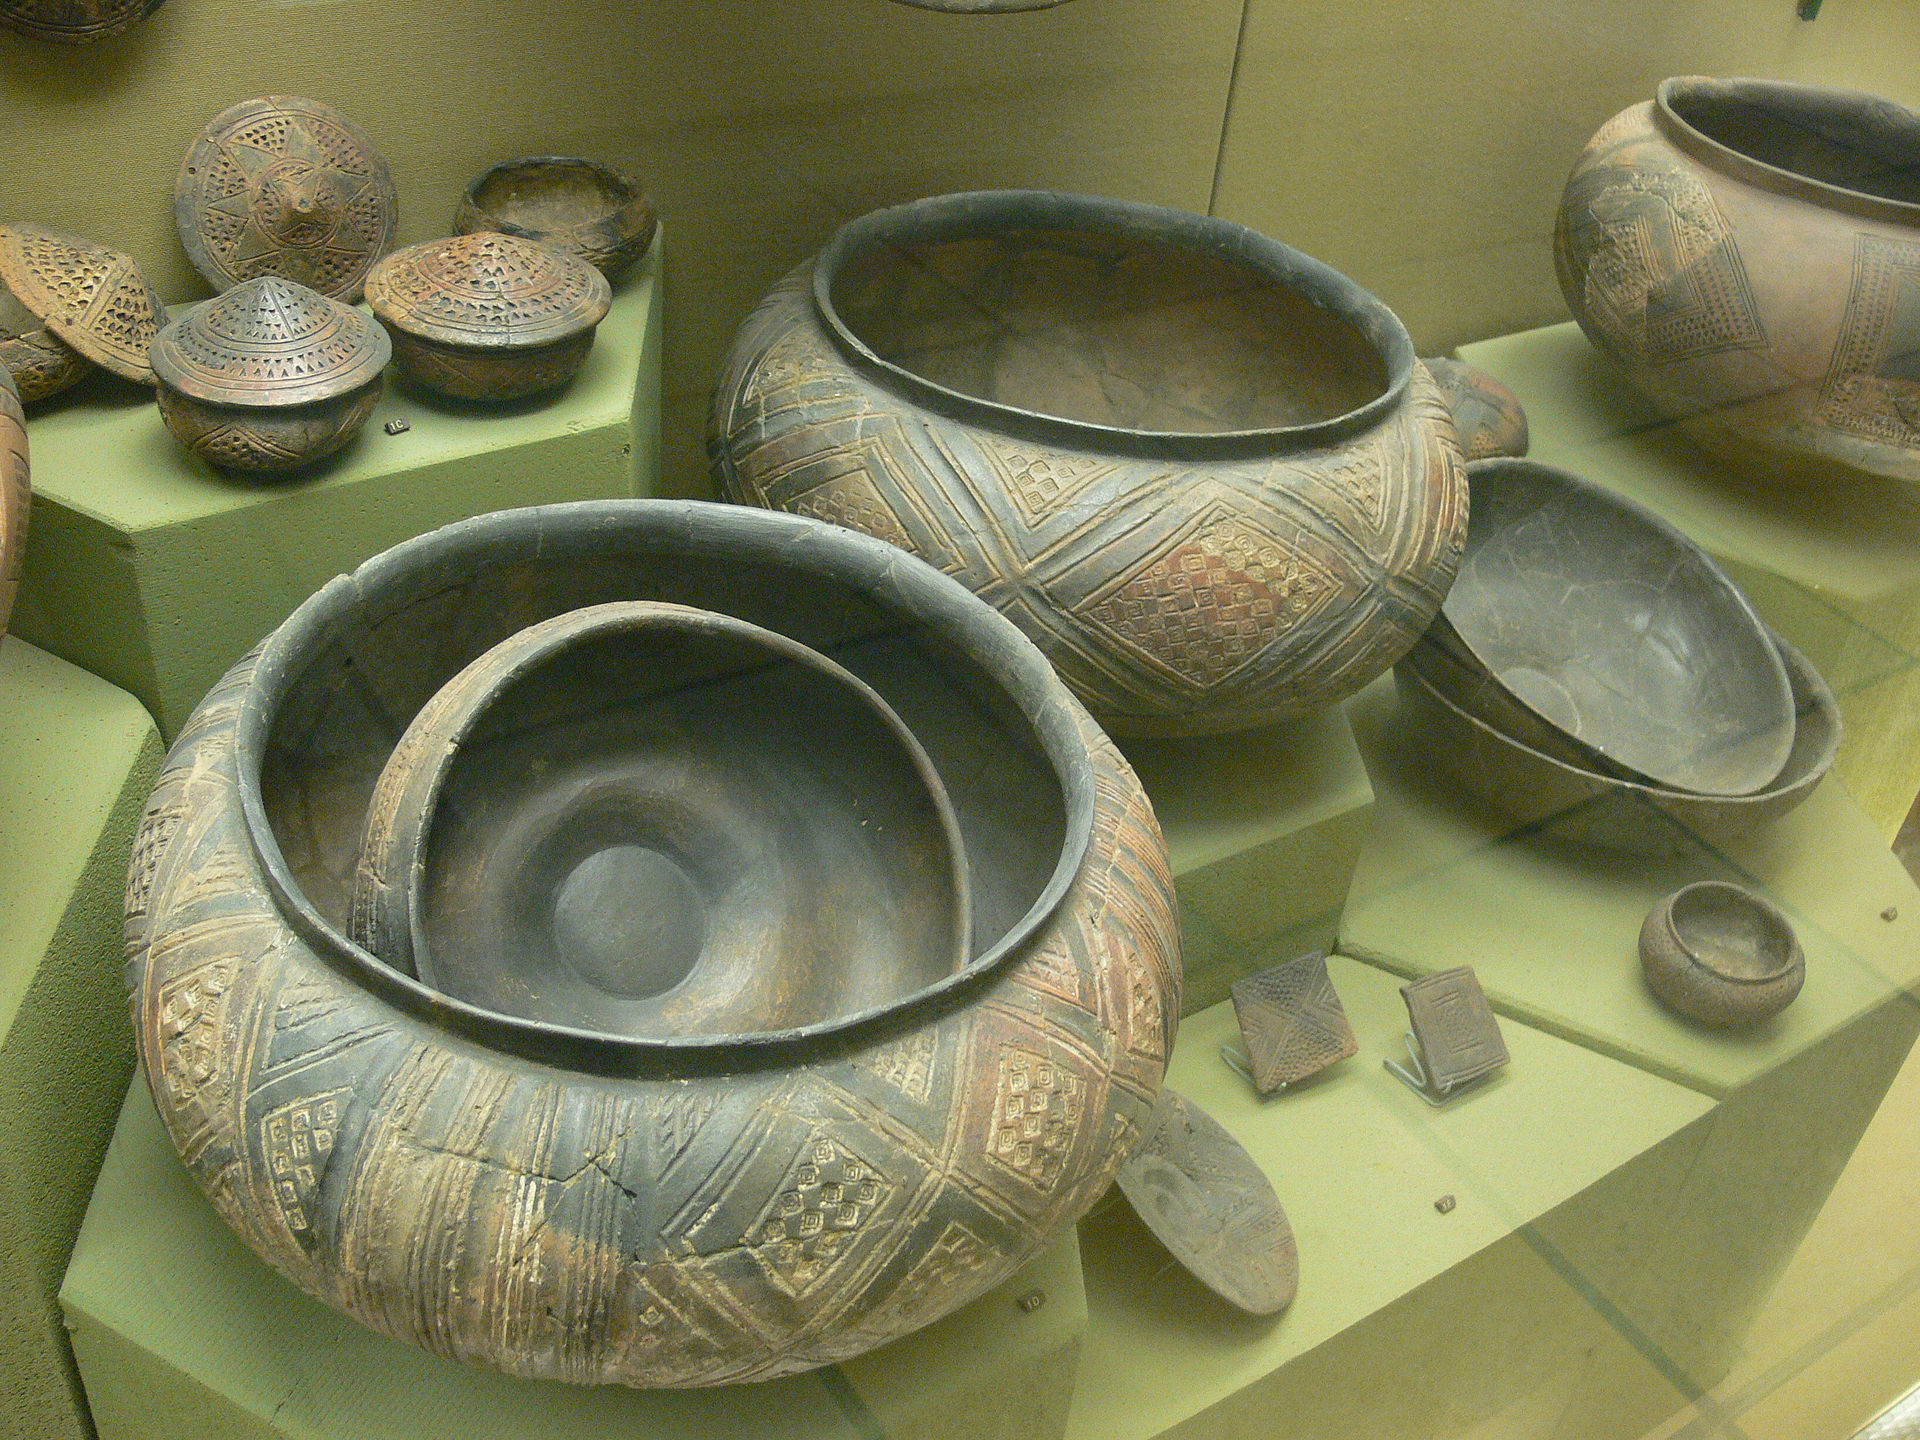 Pottery found at the site, on display in Stuttgart.